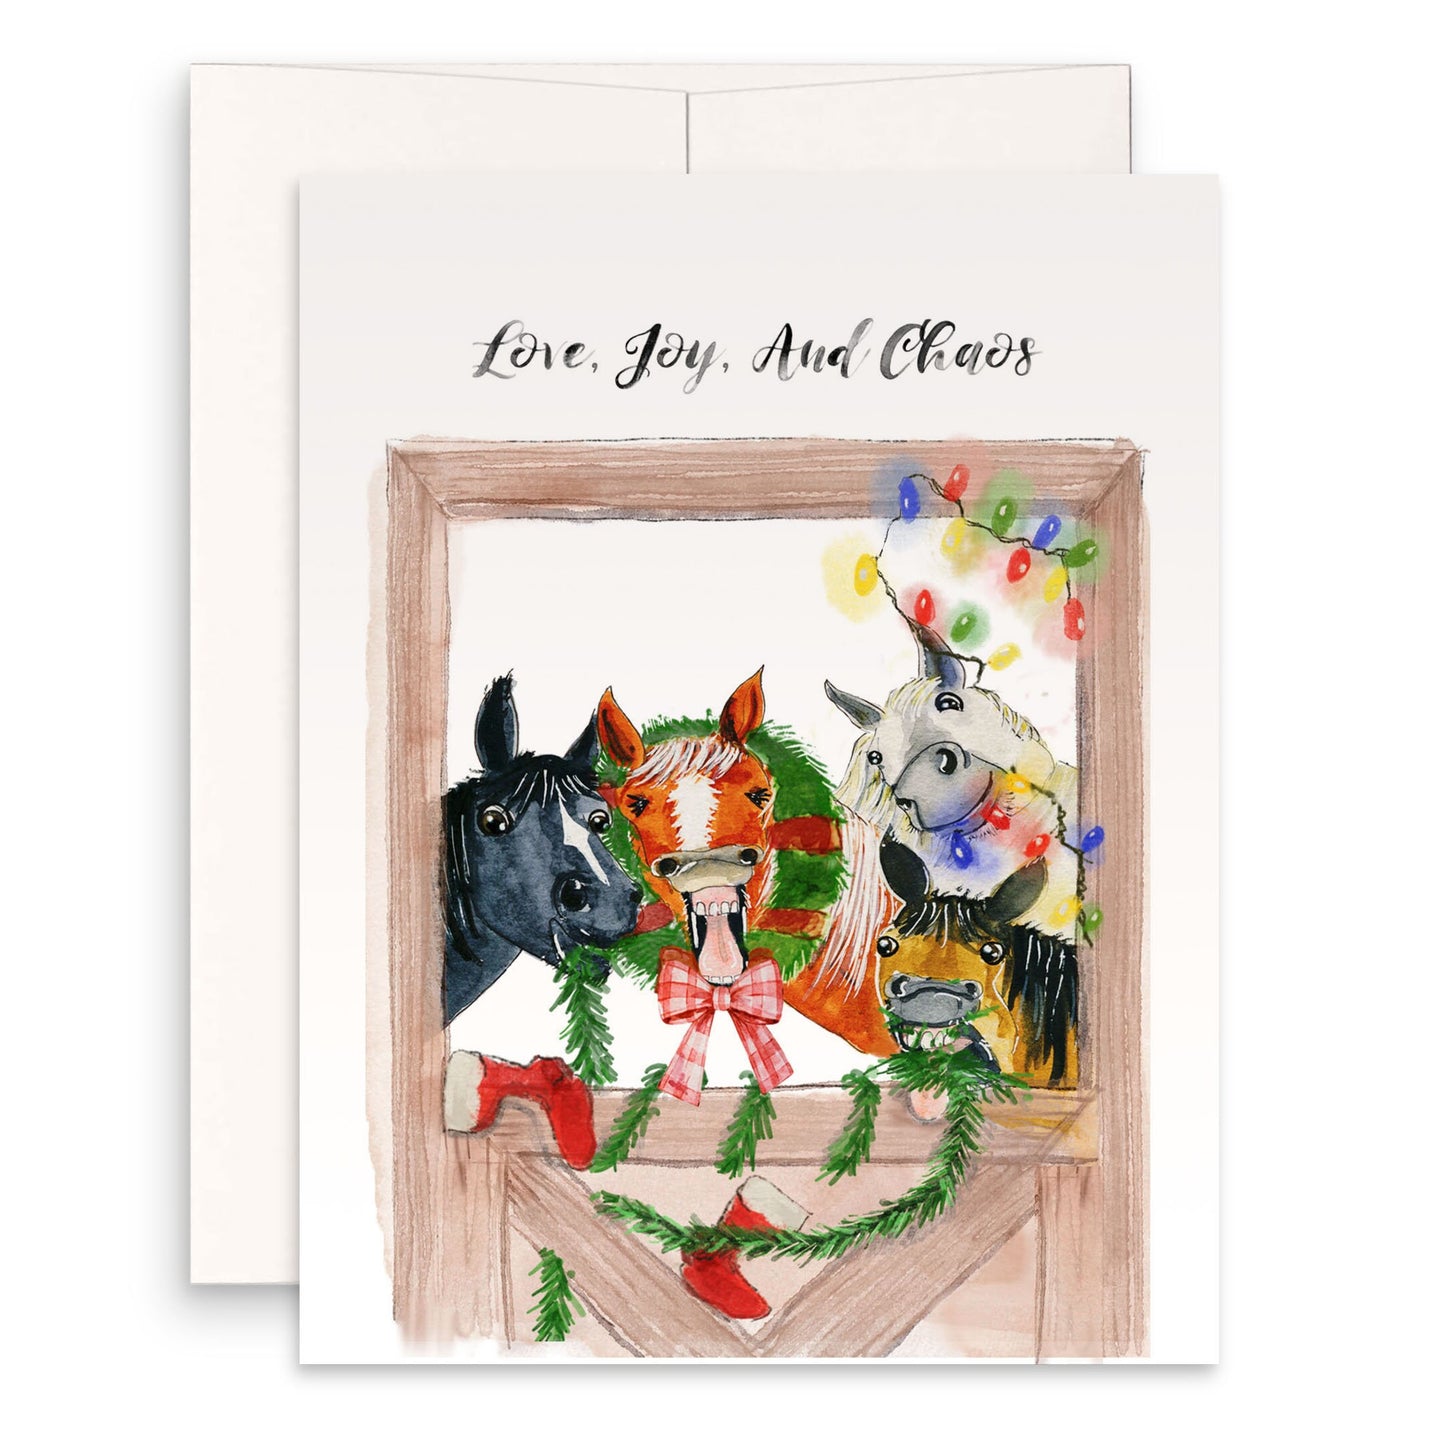 Barn Horses Christmas Cards Funny For Horse Lovers - Stable Farmhouse Holiday Cards For Her - Liyana Studio Handmade Greetings